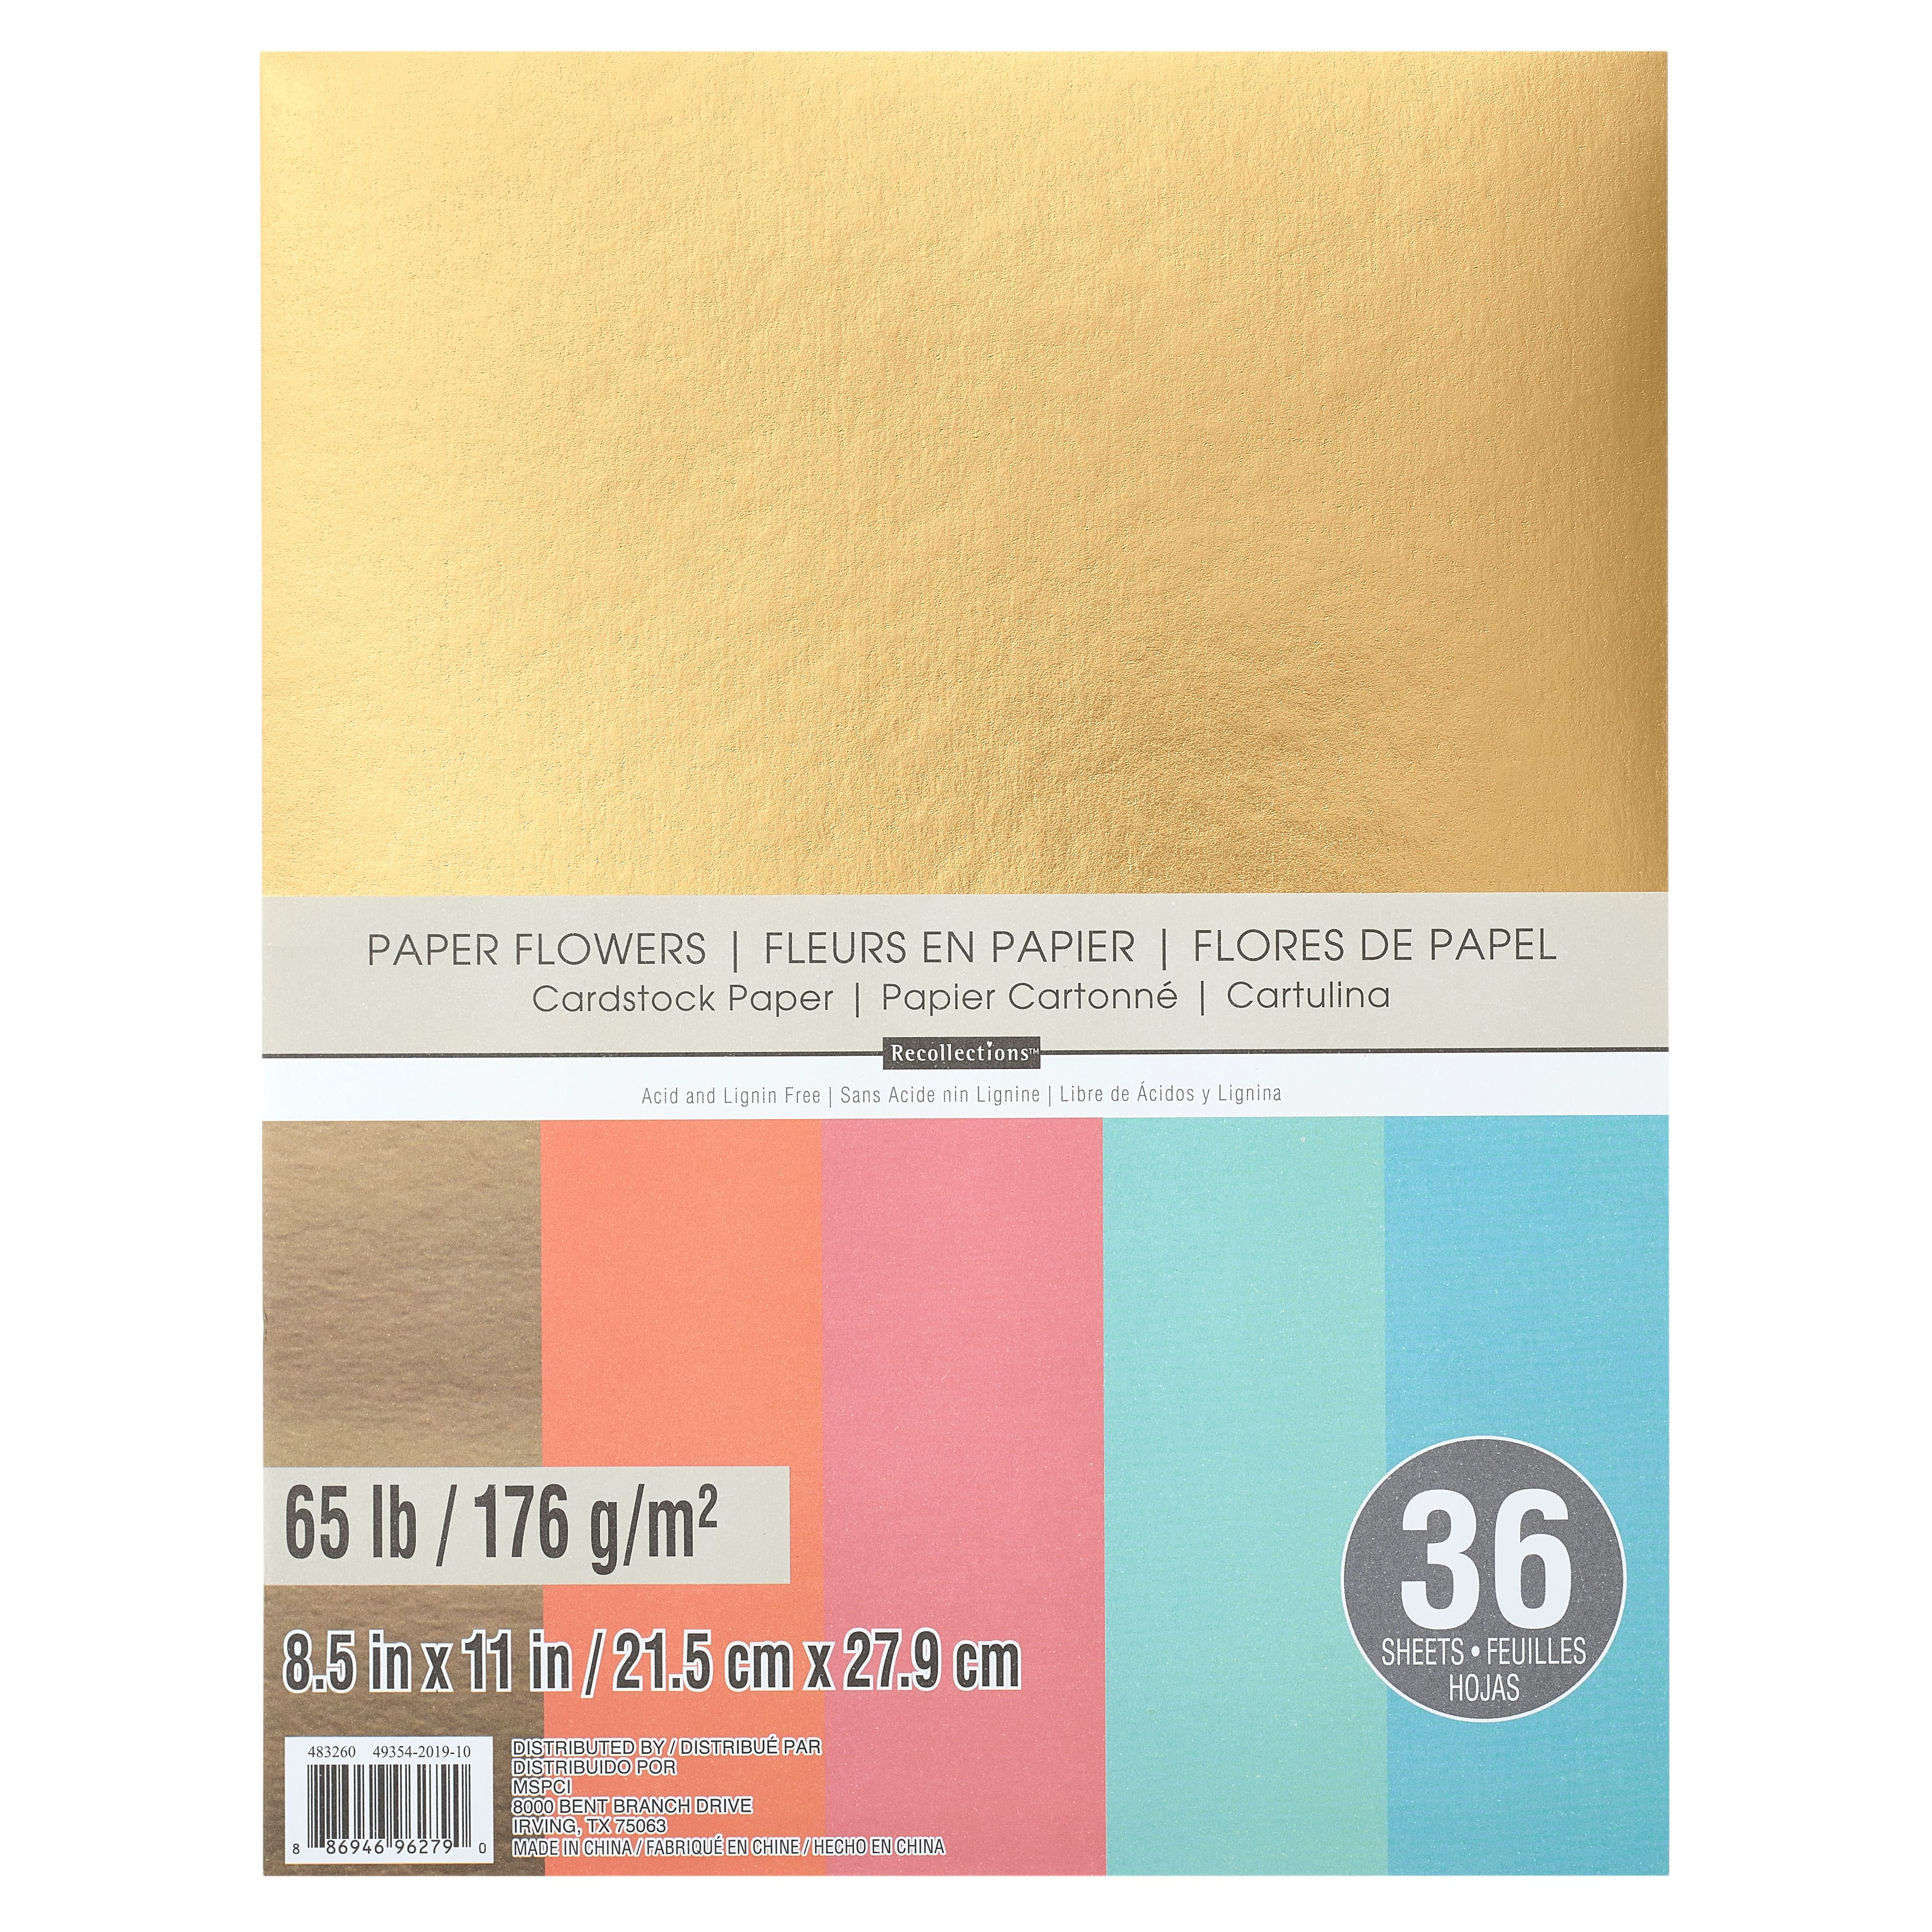 My Colors Classic Cardstock: Petal Pink – The-Whole-Kit-N-Kaboodle